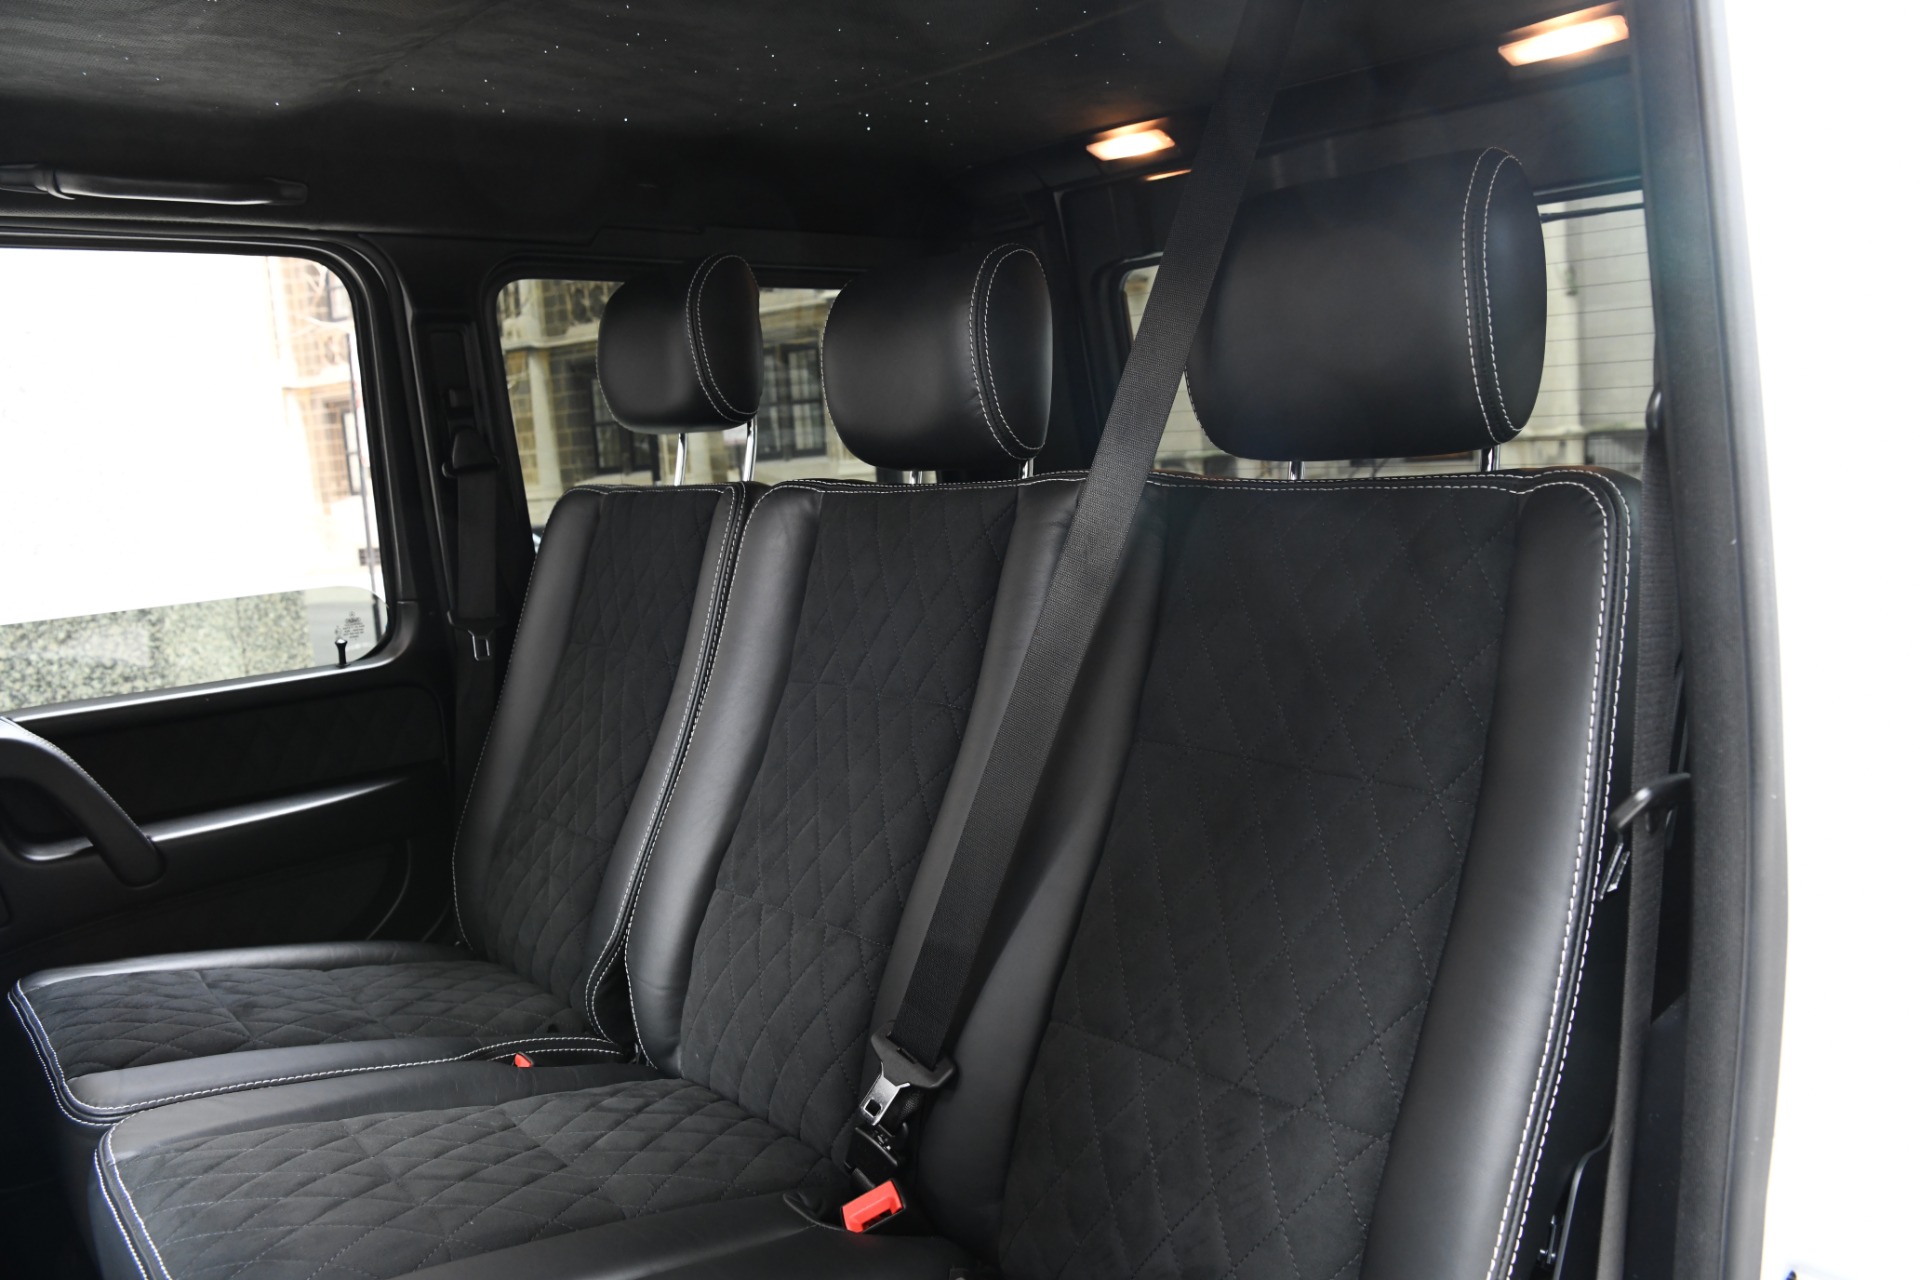 Used 2017 Mercedes-Benz G-Class G 550 4x4 Squared | Chicago, IL